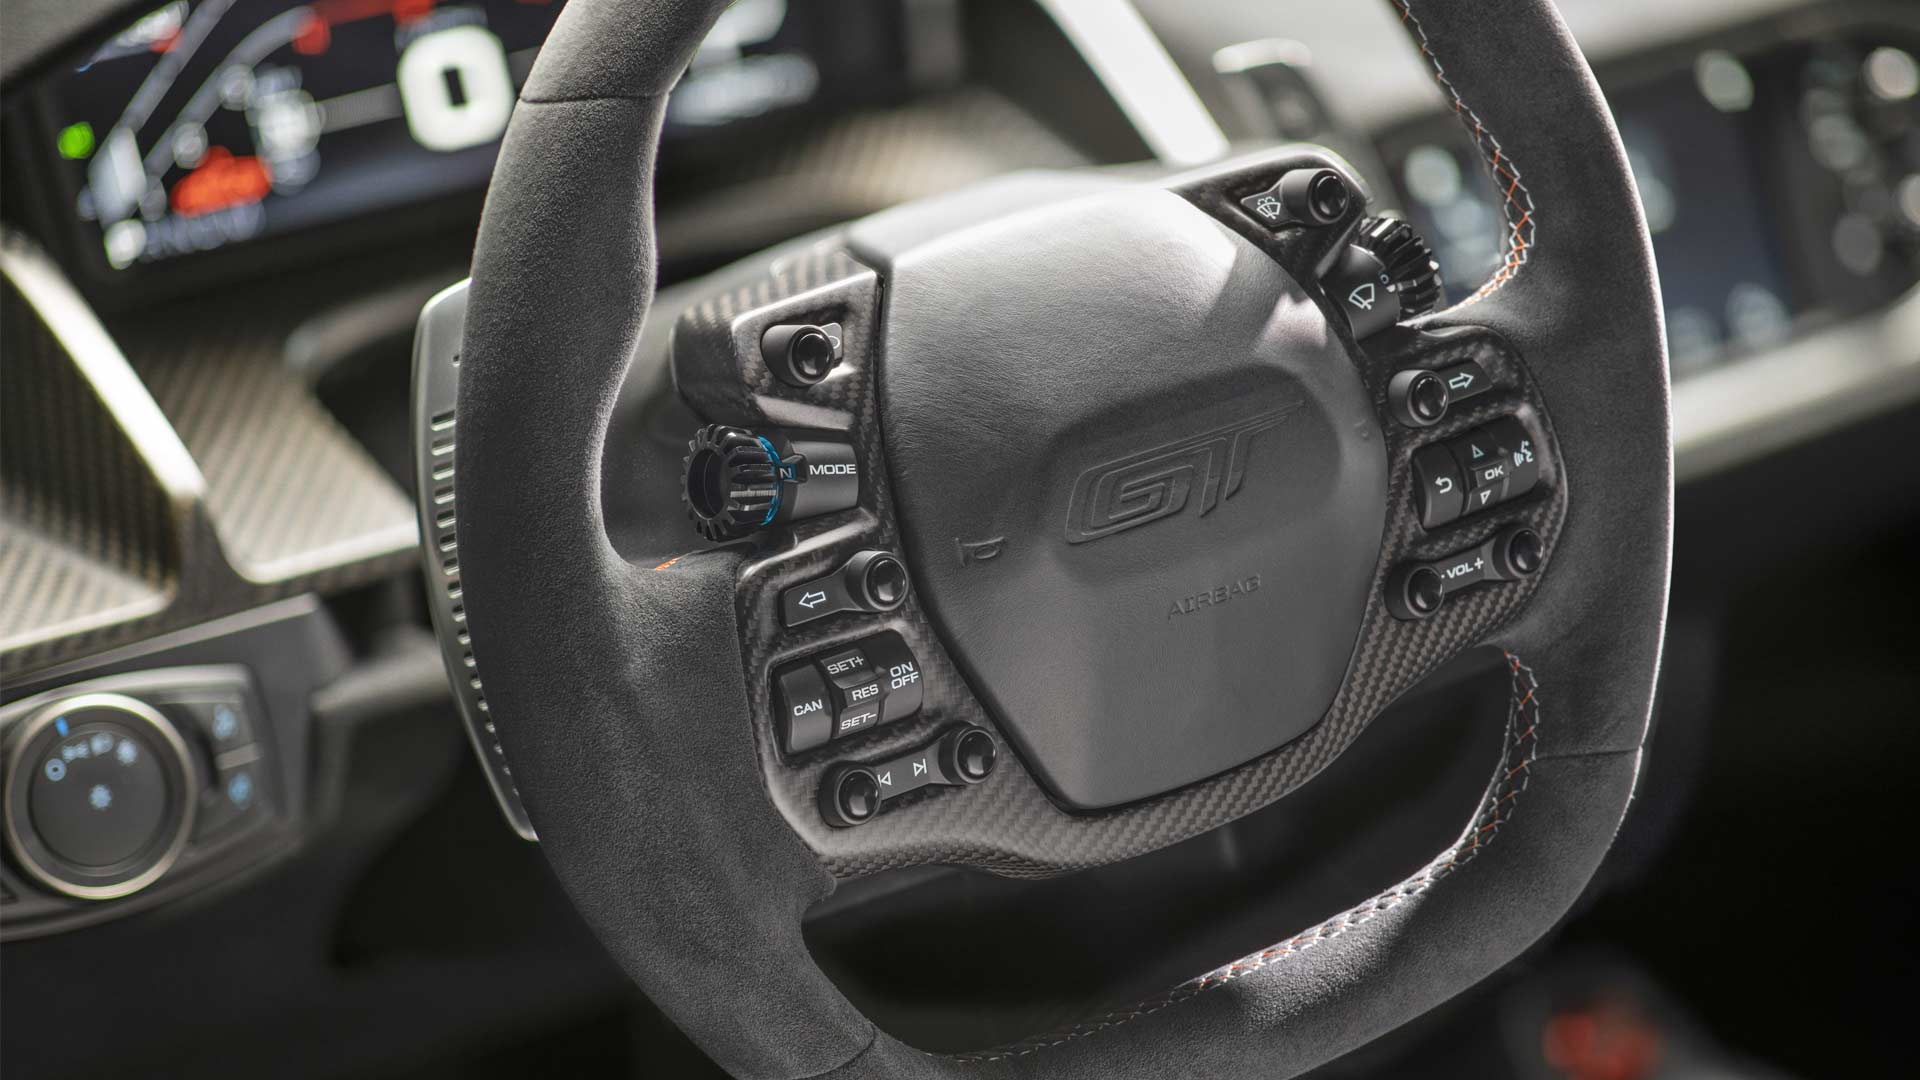 2019-Ford-GT-Heritage-Edition-Interior-Steering-Wheel